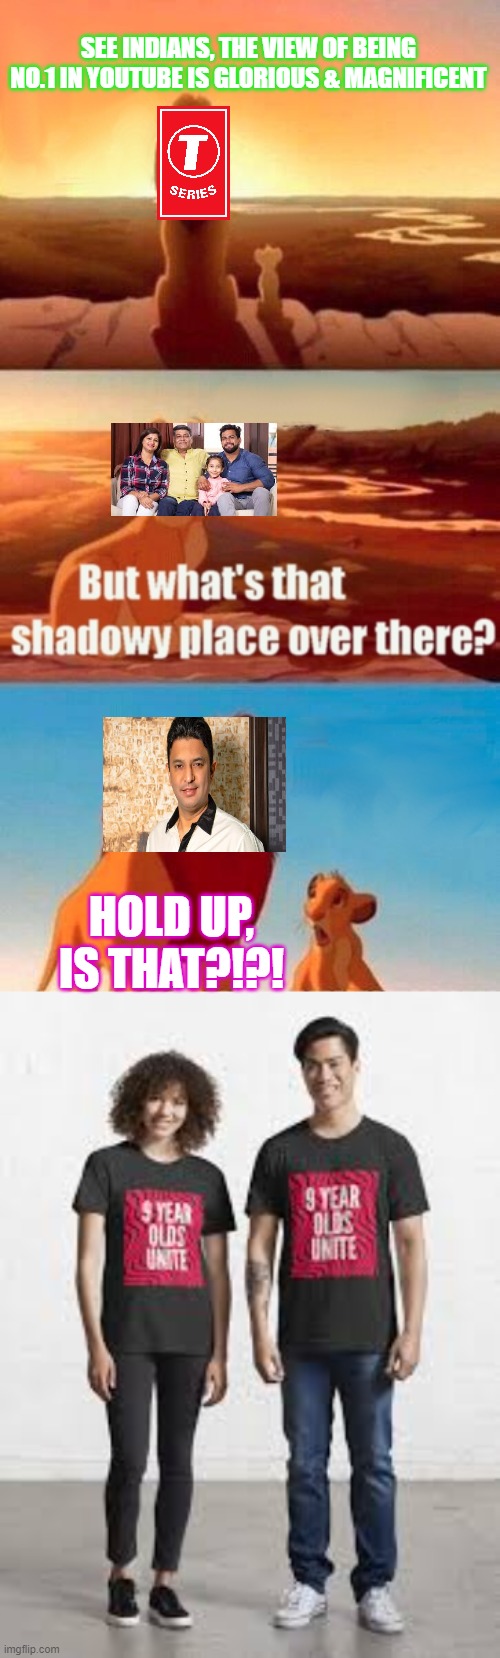 SEE INDIANS, THE VIEW OF BEING NO.1 IN YOUTUBE IS GLORIOUS & MAGNIFICENT; HOLD UP, IS THAT?!?! | image tagged in memes,simba shadowy place | made w/ Imgflip meme maker